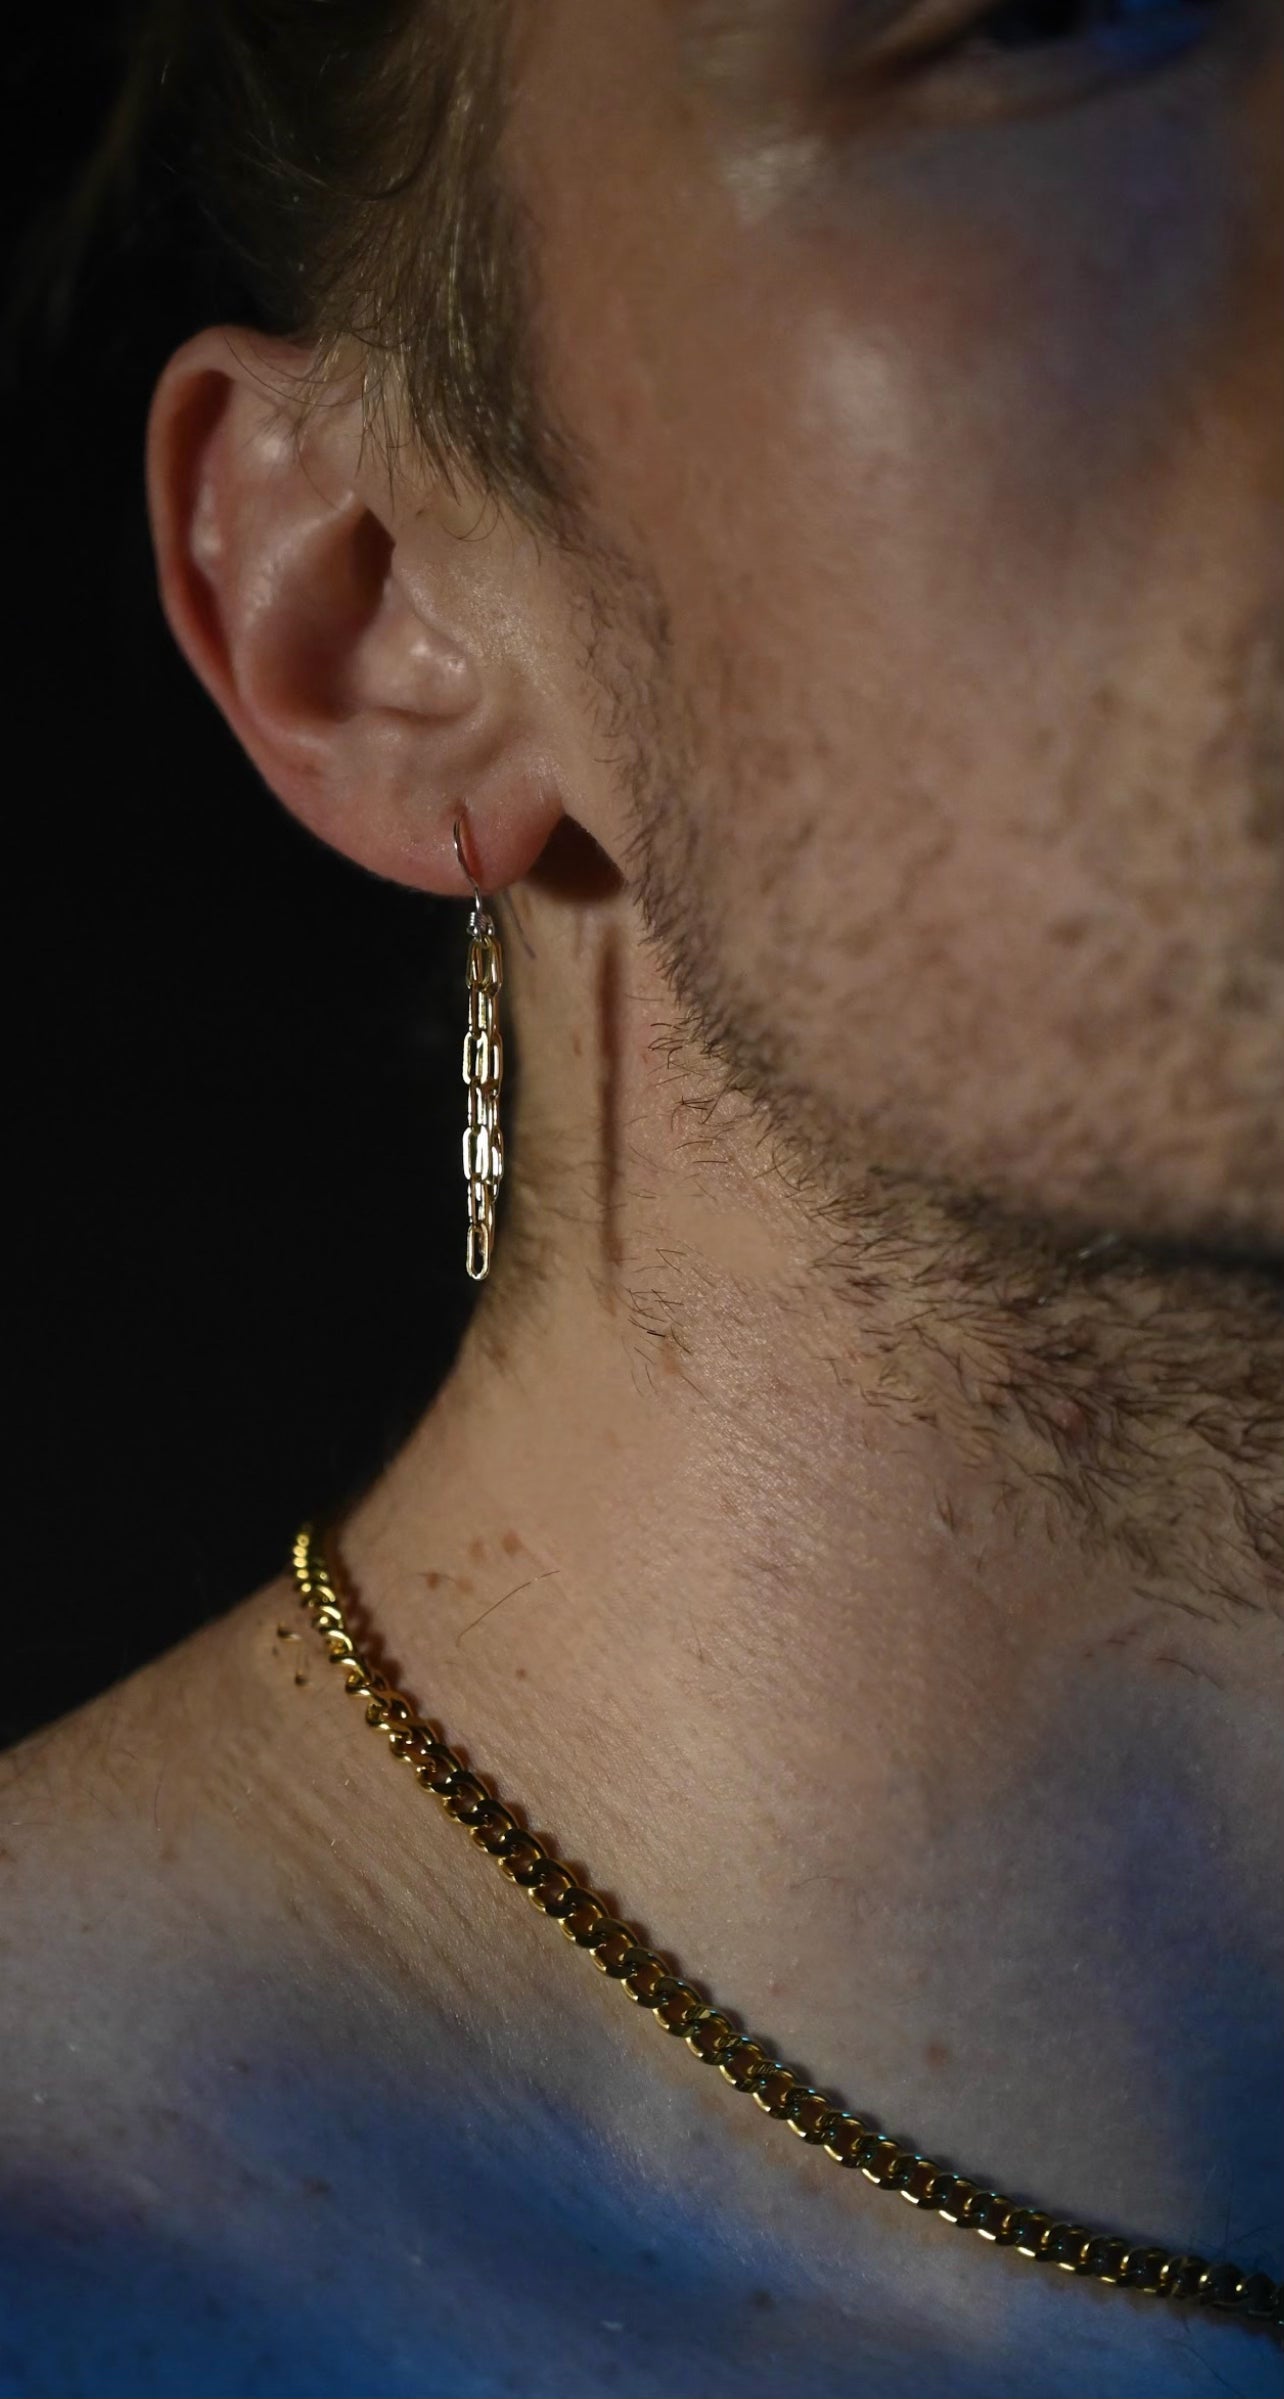 The Mixed Chain Earring